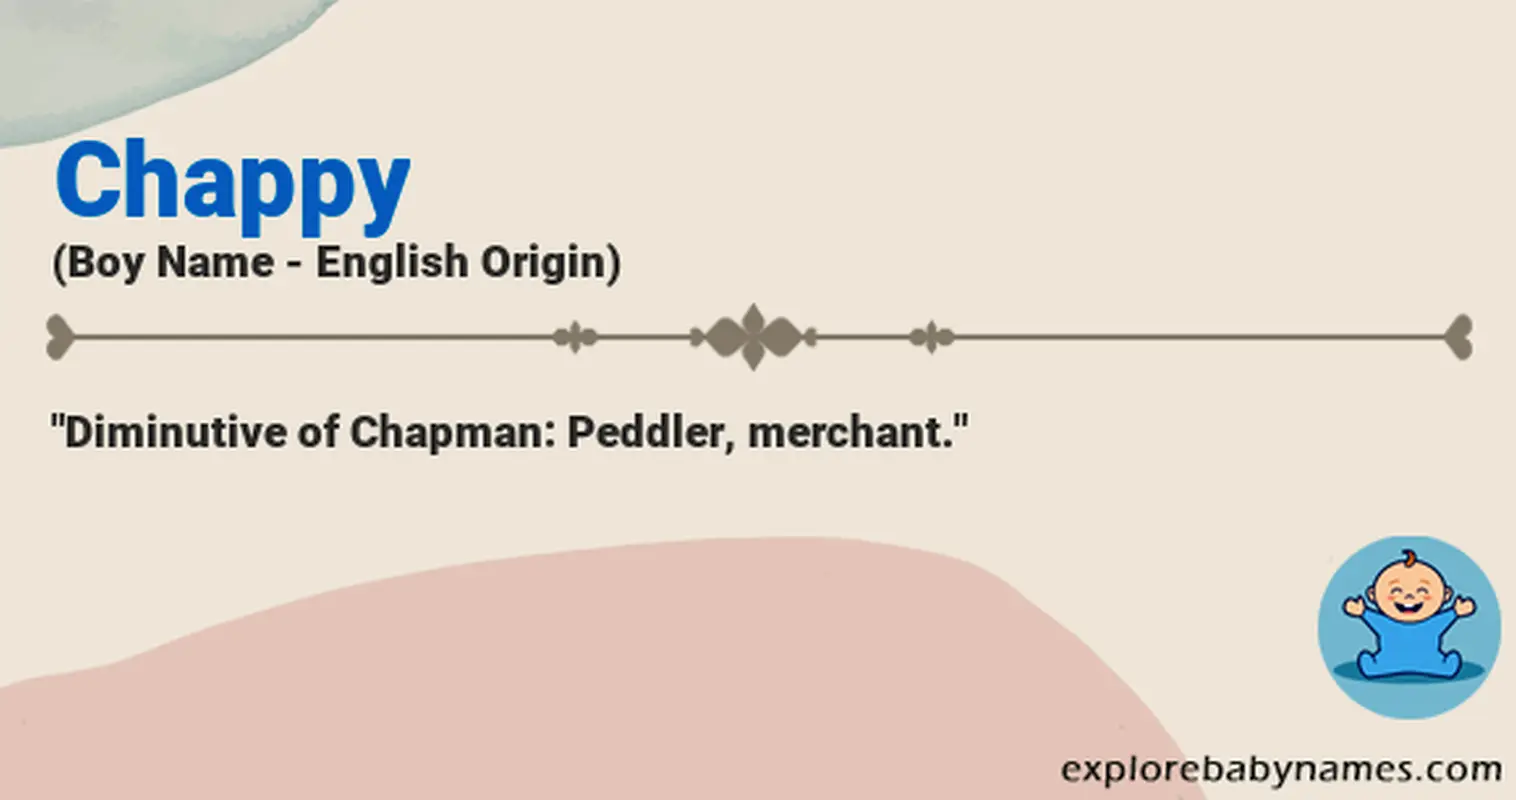 Meaning of Chappy